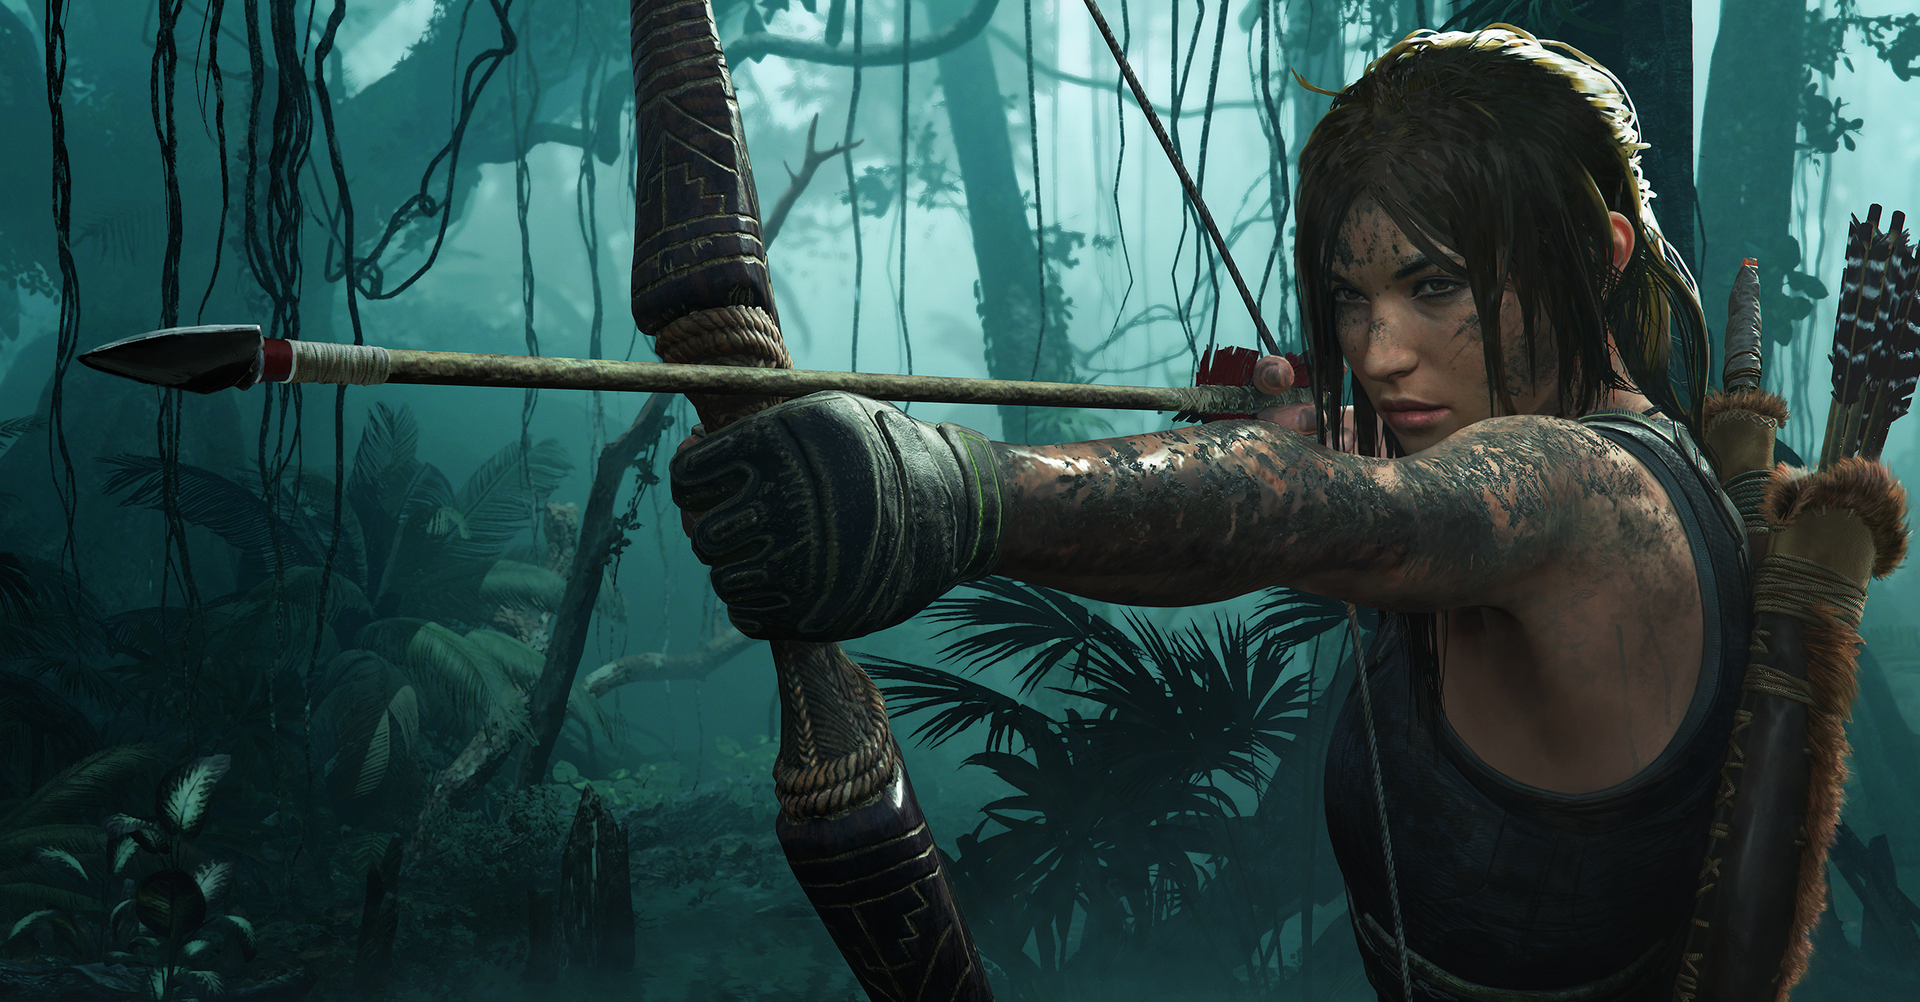 tomb raider free download for pc